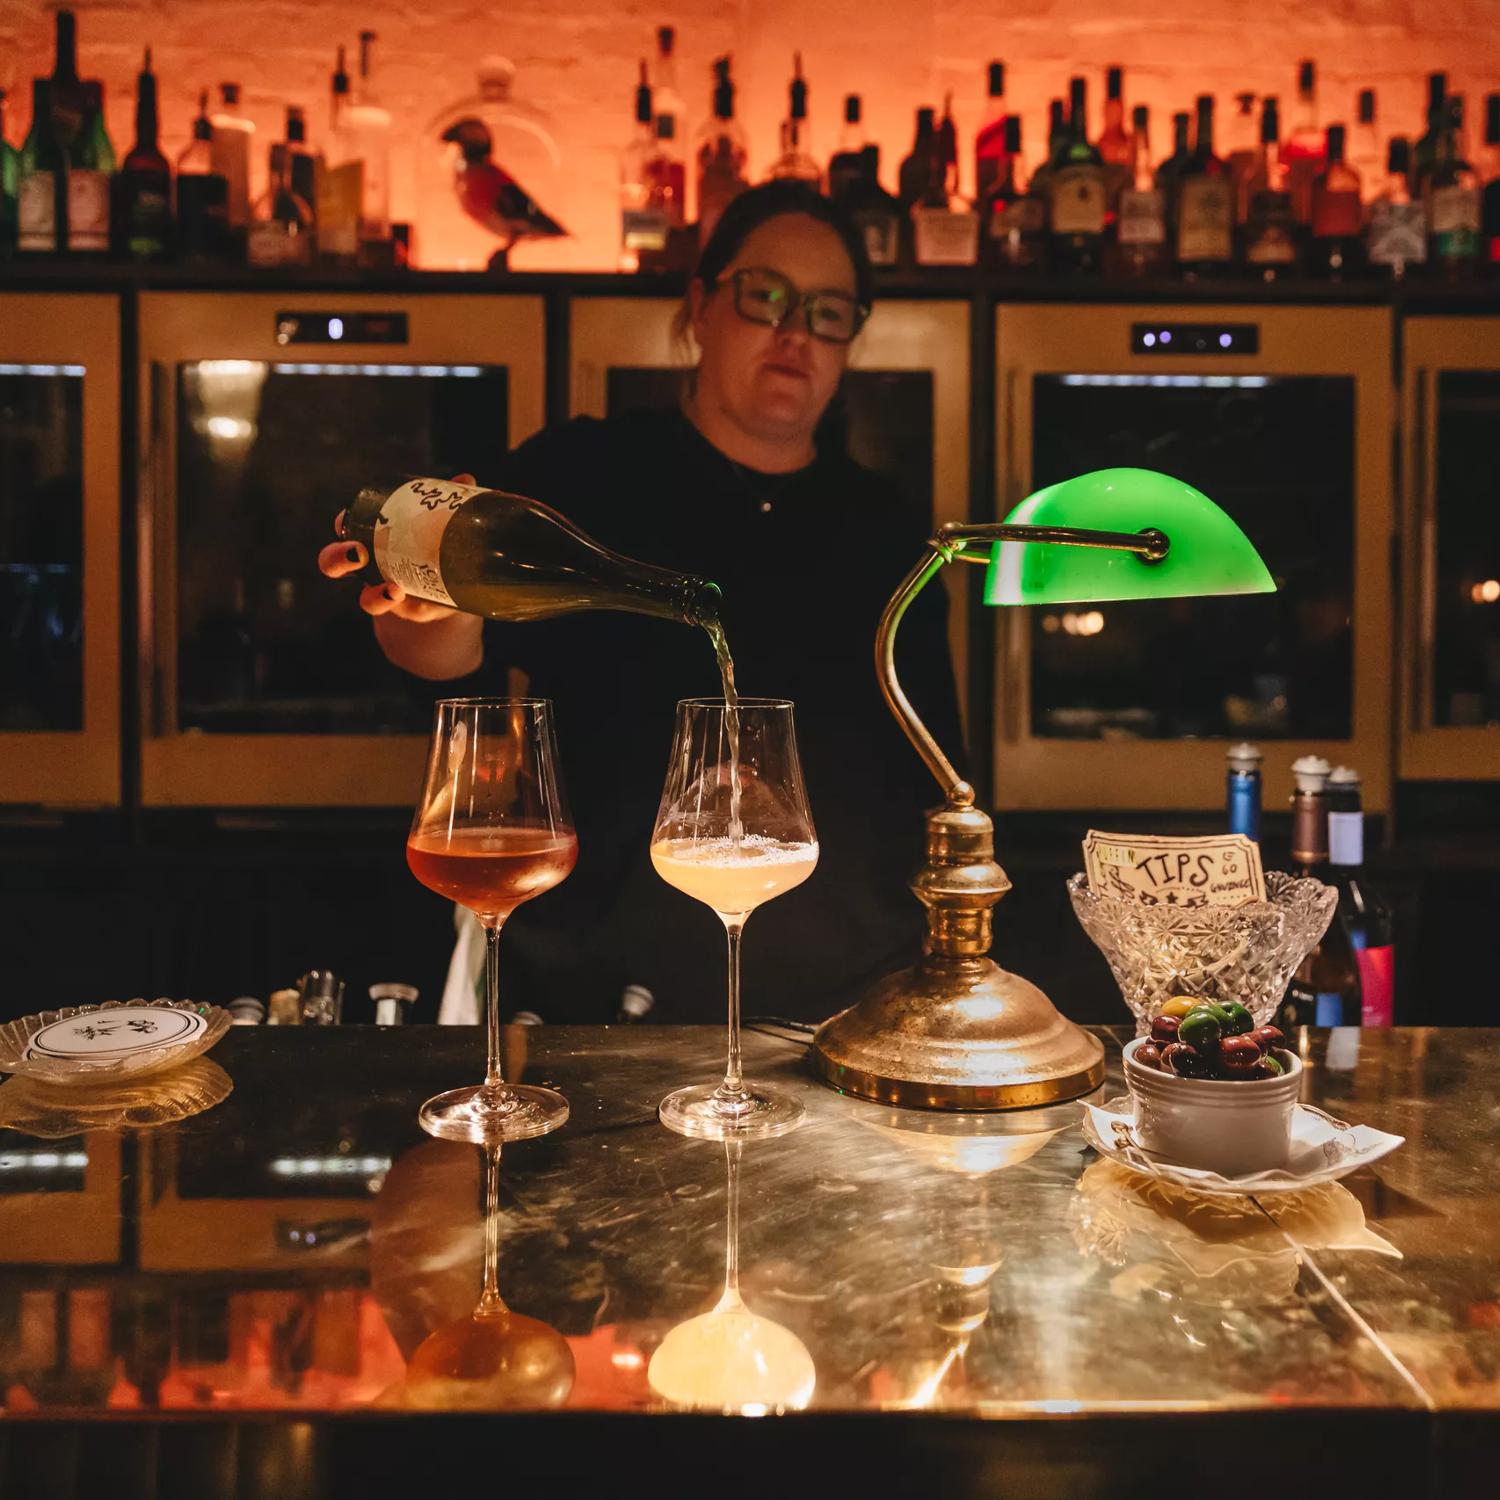 A bartender stands behind the bar pouring two glasses of wine at Puffin, a chic winebar in Te Aro, Wellington.